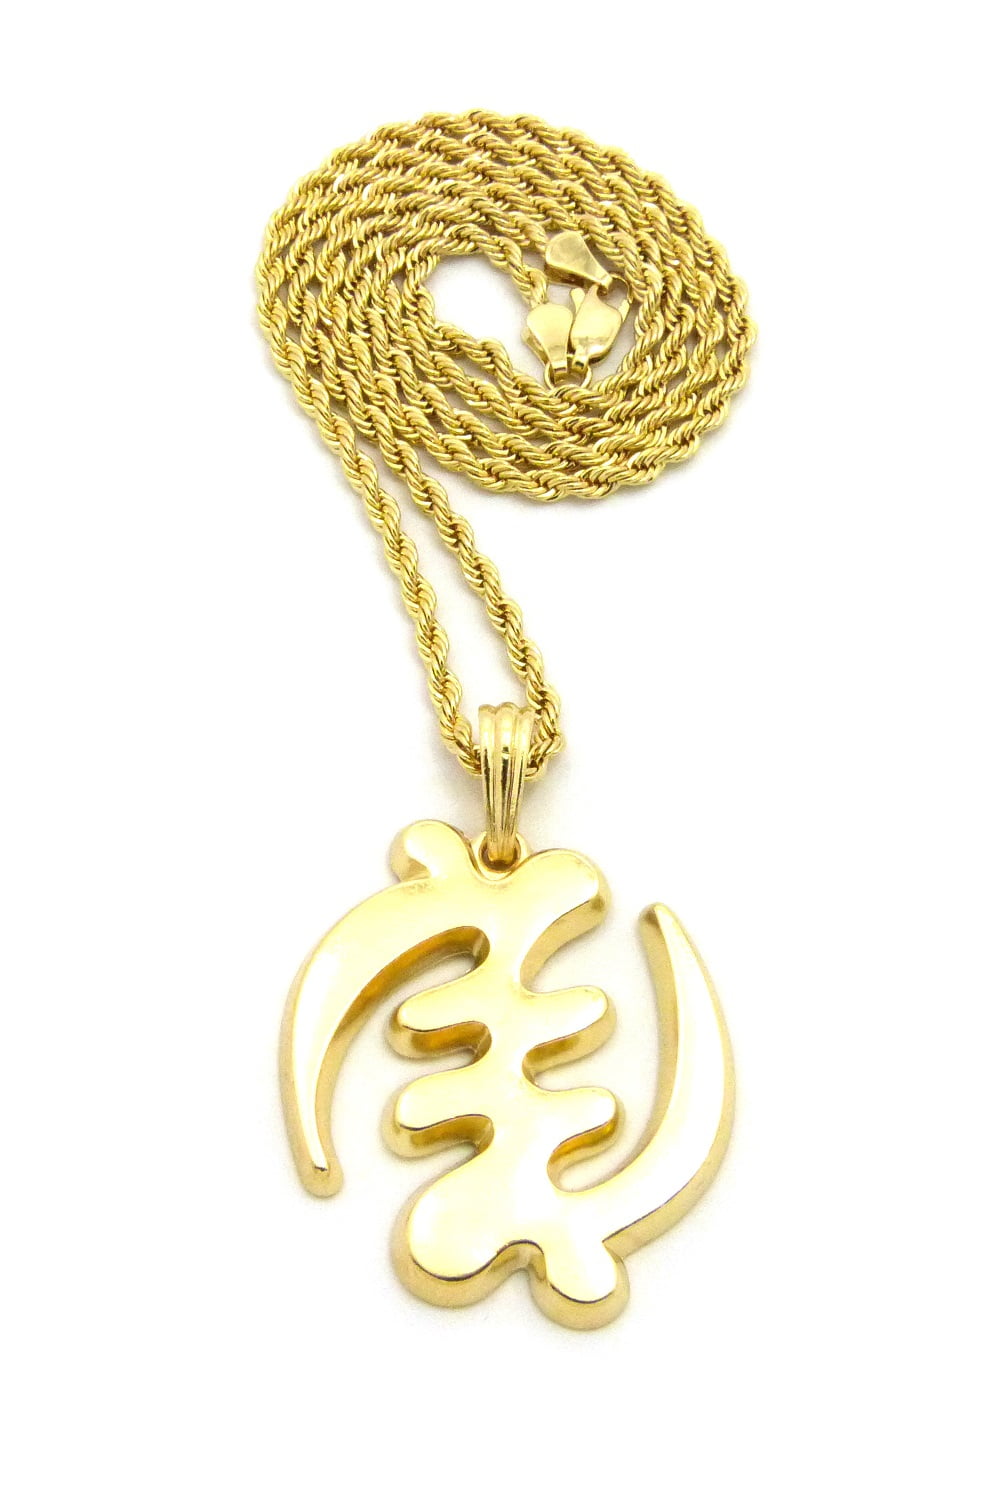 Try GOD Necklace Gold Try God Necklace 14k Heavy Plated Gold - Etsy Finland